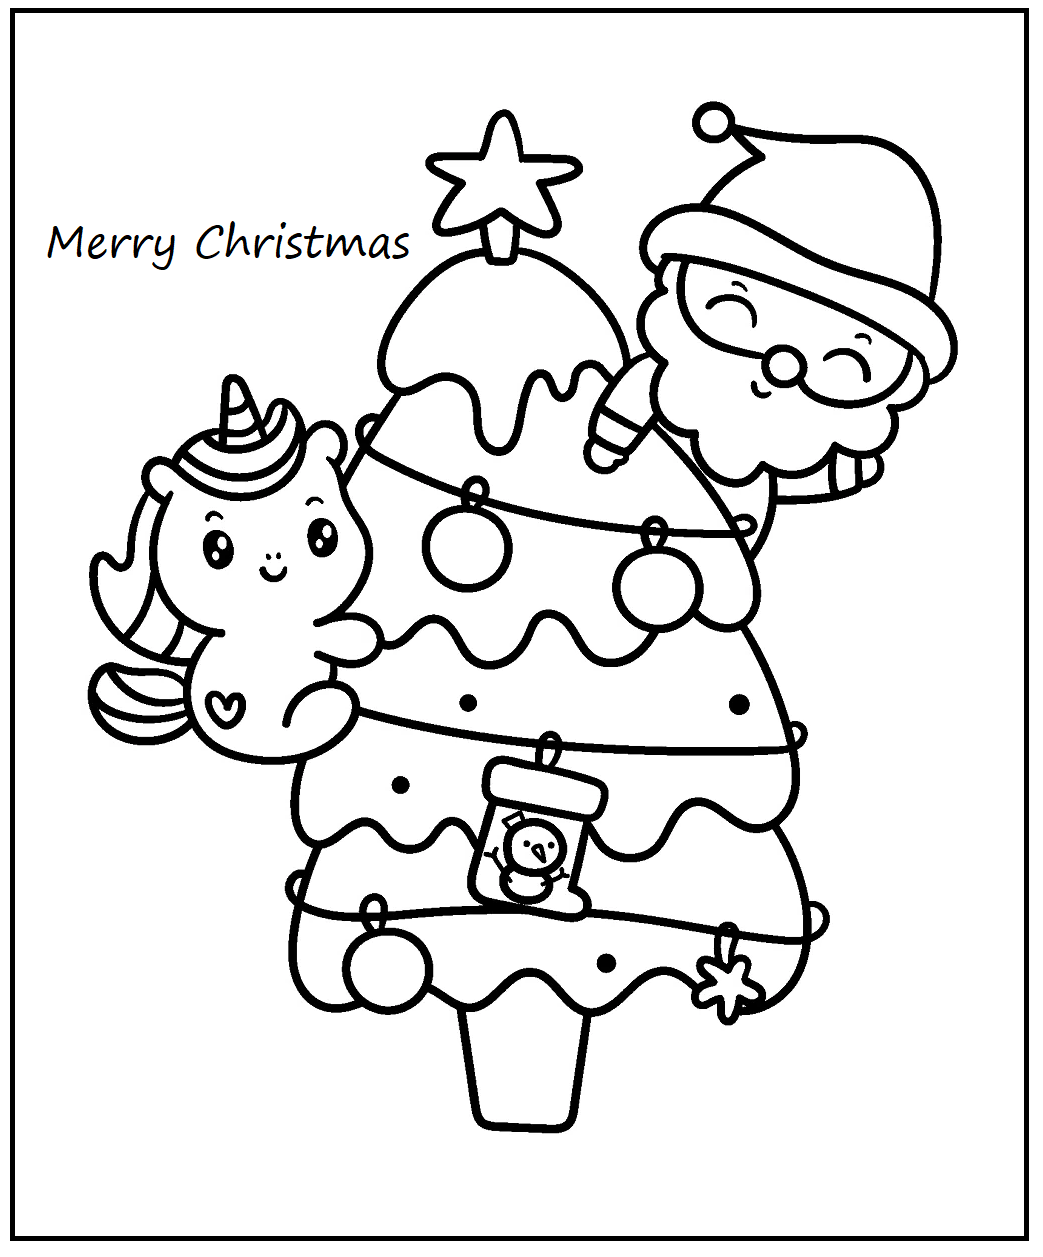 Printable Cute Christmas   3 Coloring Page for kids.